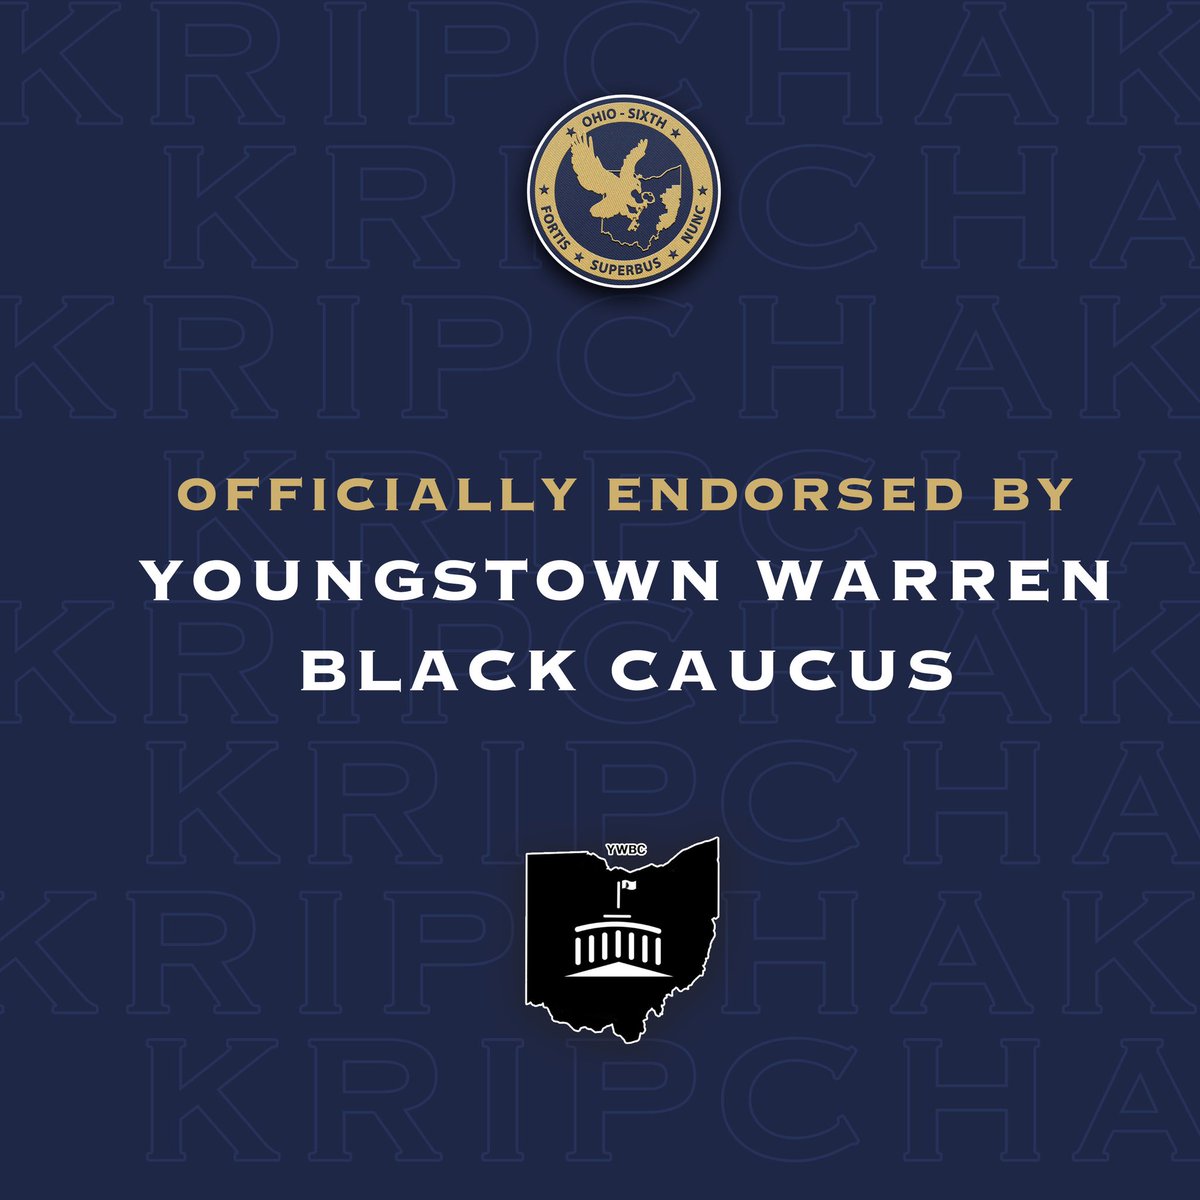 Proud to have been endorsed by the Youngstown Warren Black Caucus, and the Austintown Democrat Club, ahead of next week’s primary election.